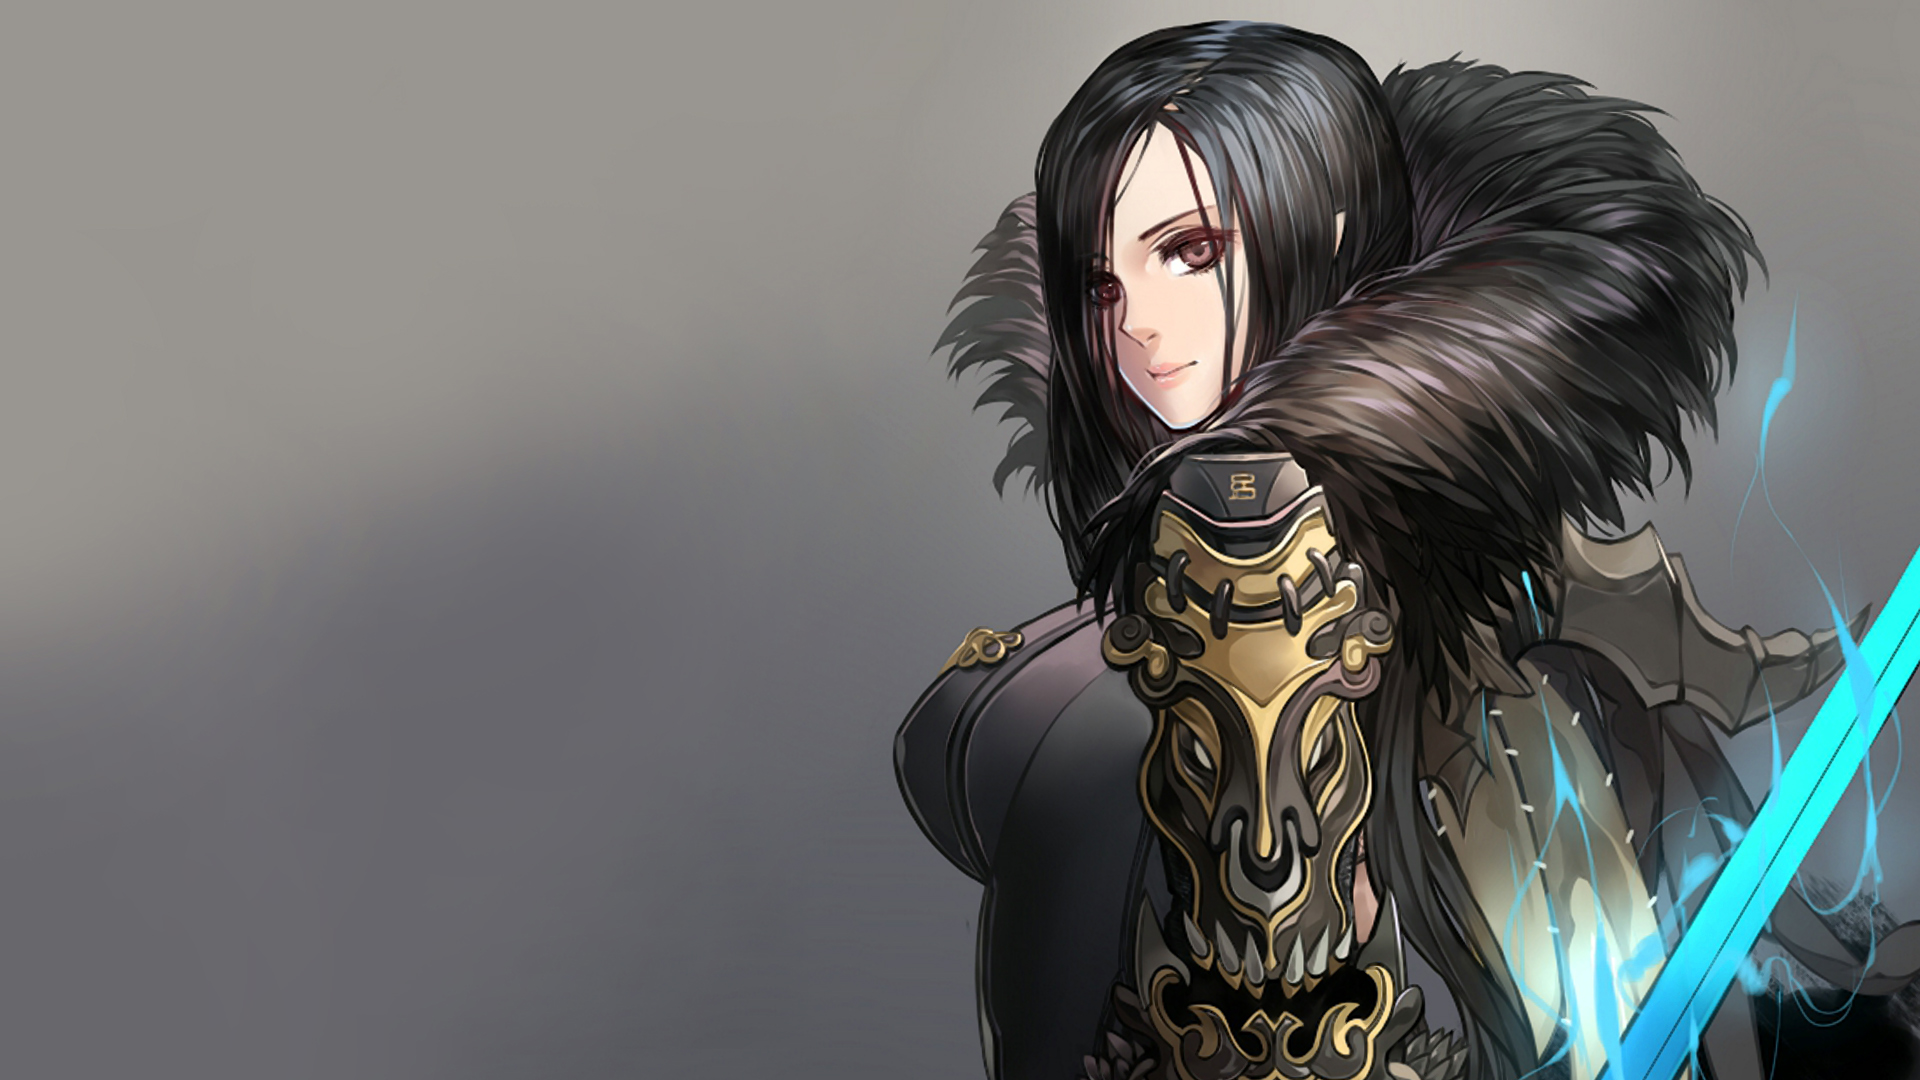 jin anime girl blade and soul spring 2014 1920x1080 1080p wallpaper